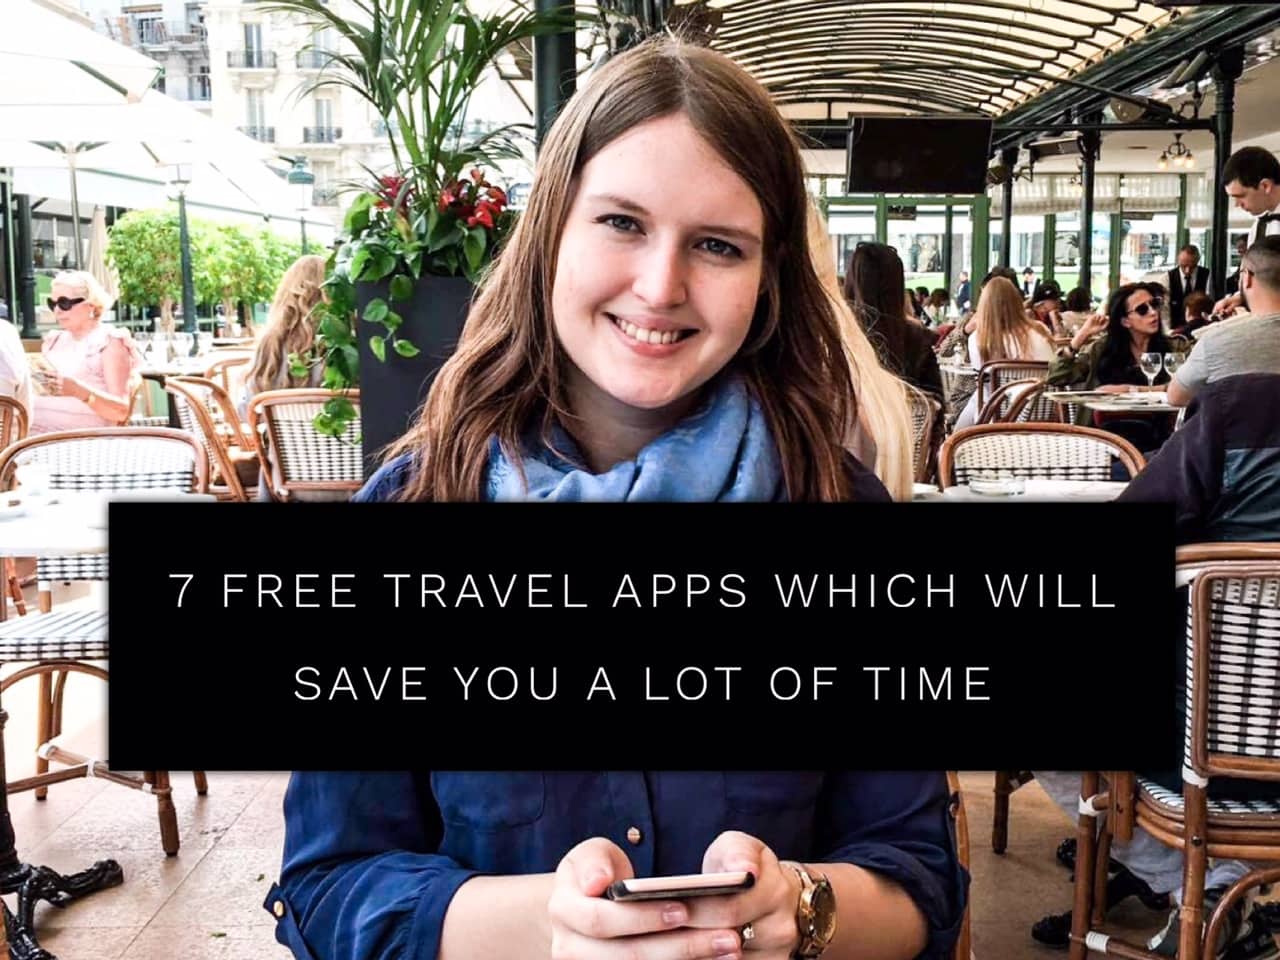 7 free travel apps, which will save you A LOT of time